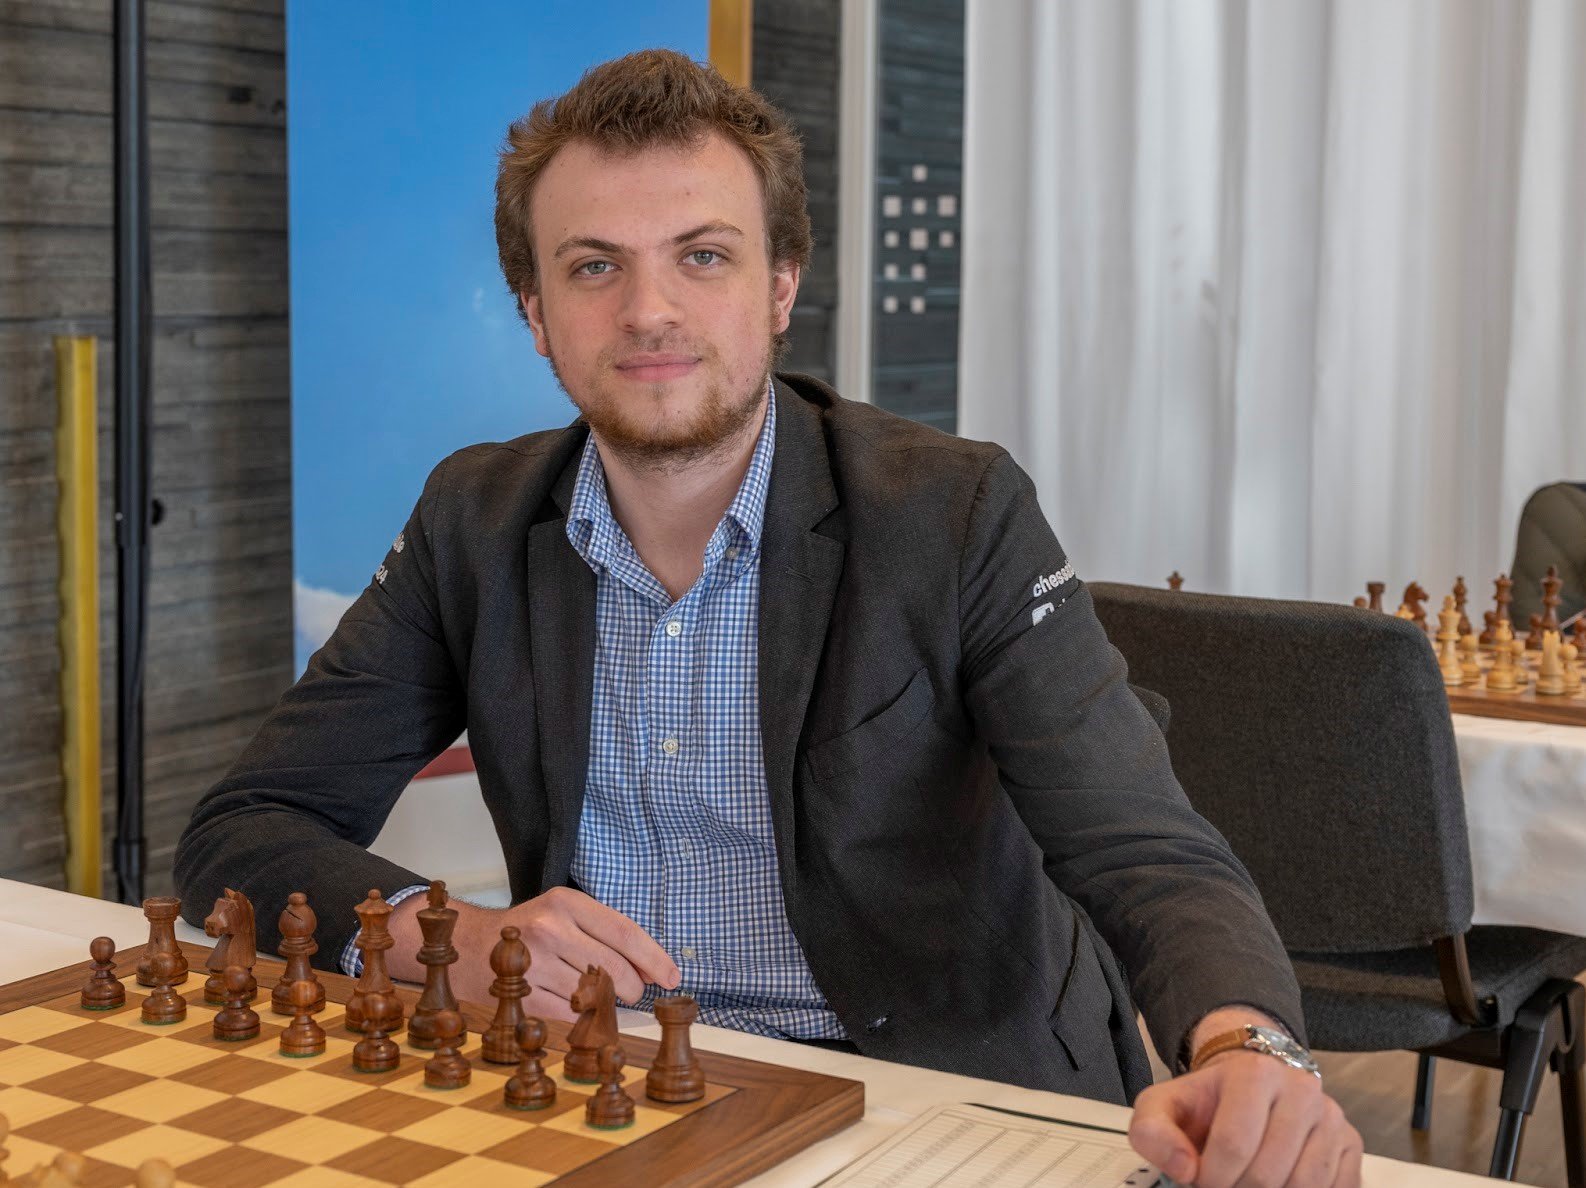 Chess.com released a 72-page-long Hans Niemann Report this